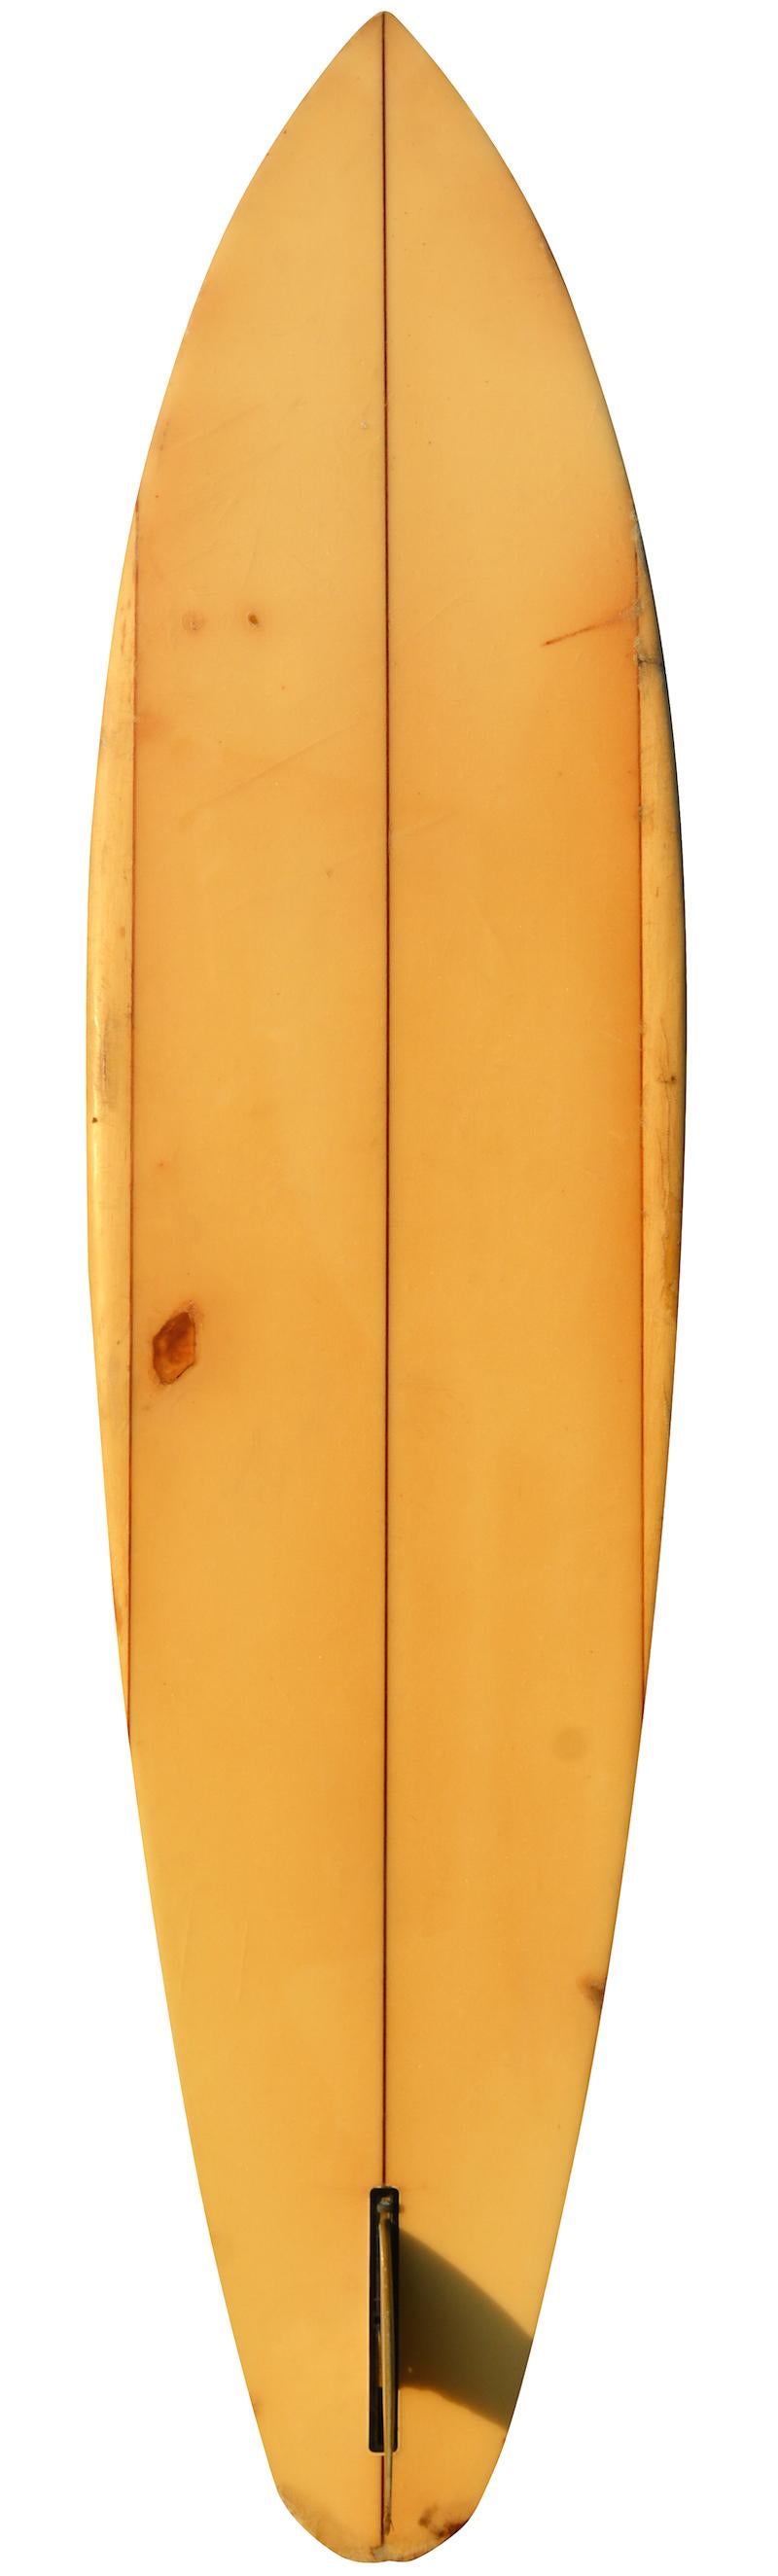 Early to mid-1970s Newport beach brotherhood single fin shortboard shaped by Michael O’Day. Features unique balsawood rails with original tri-color single fin. Newport beach brotherhood logo inscribed with “A Masterpiece for Tom Forkner from Michael